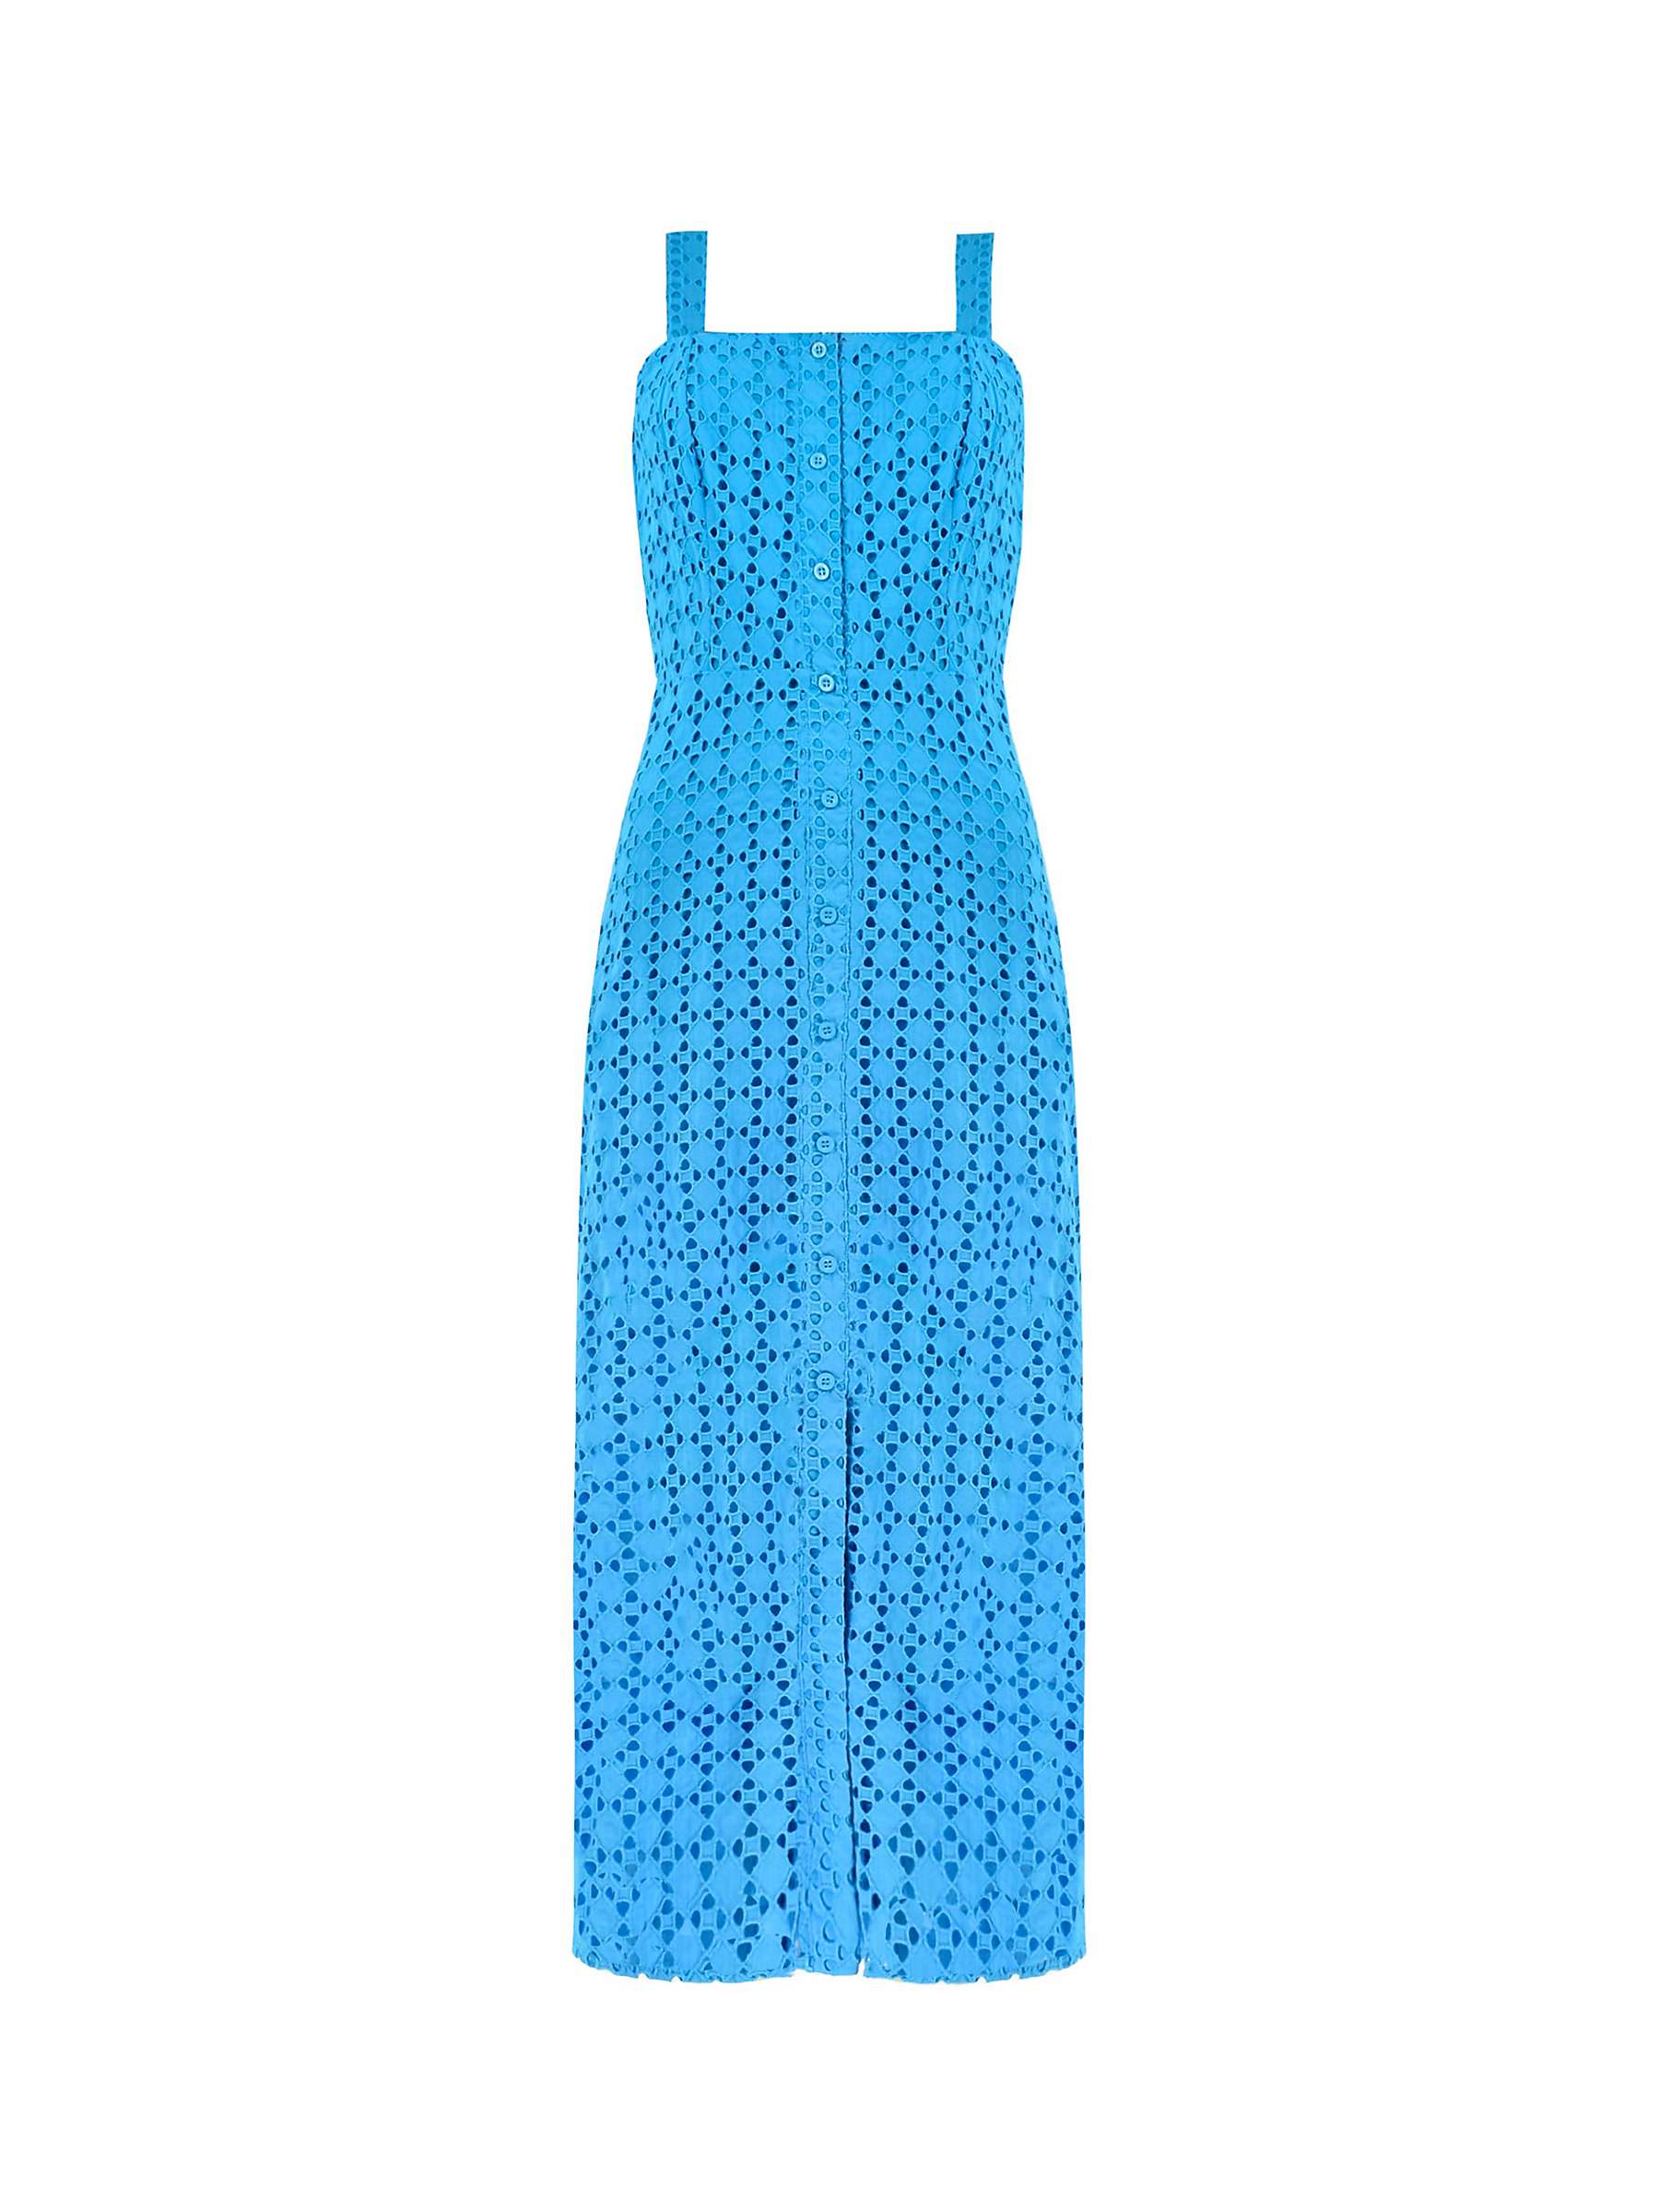 Ro&Zo Broderie Lace Strappy Dress, Blue at John Lewis & Partners